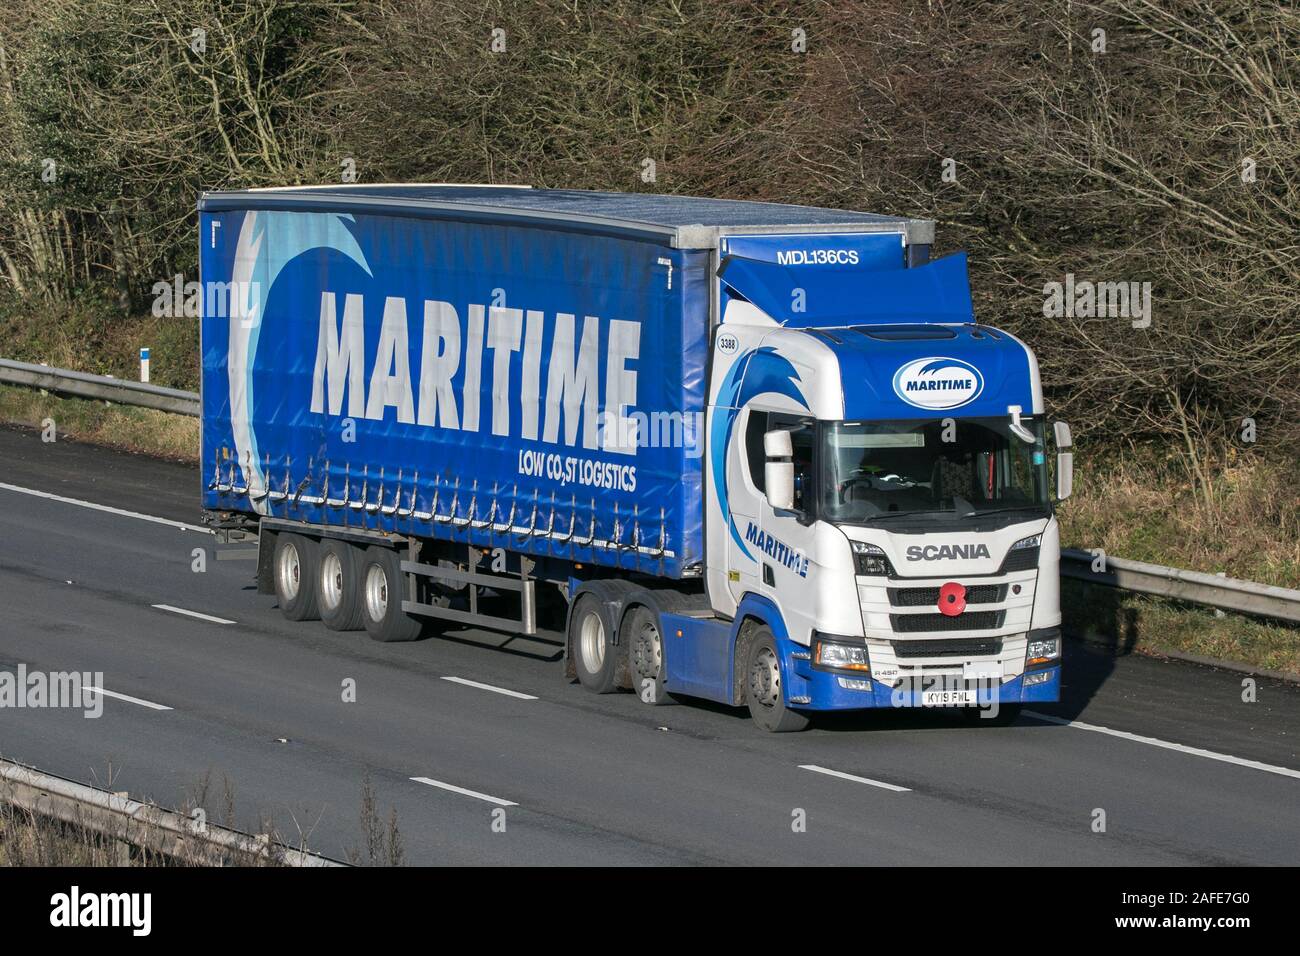 MARITIME Haulage delivery trucks, lorry, transportation, truck, cargo carrier, vehicle, European commercial transport, industry, M61 at Manchester, UK Stock Photo